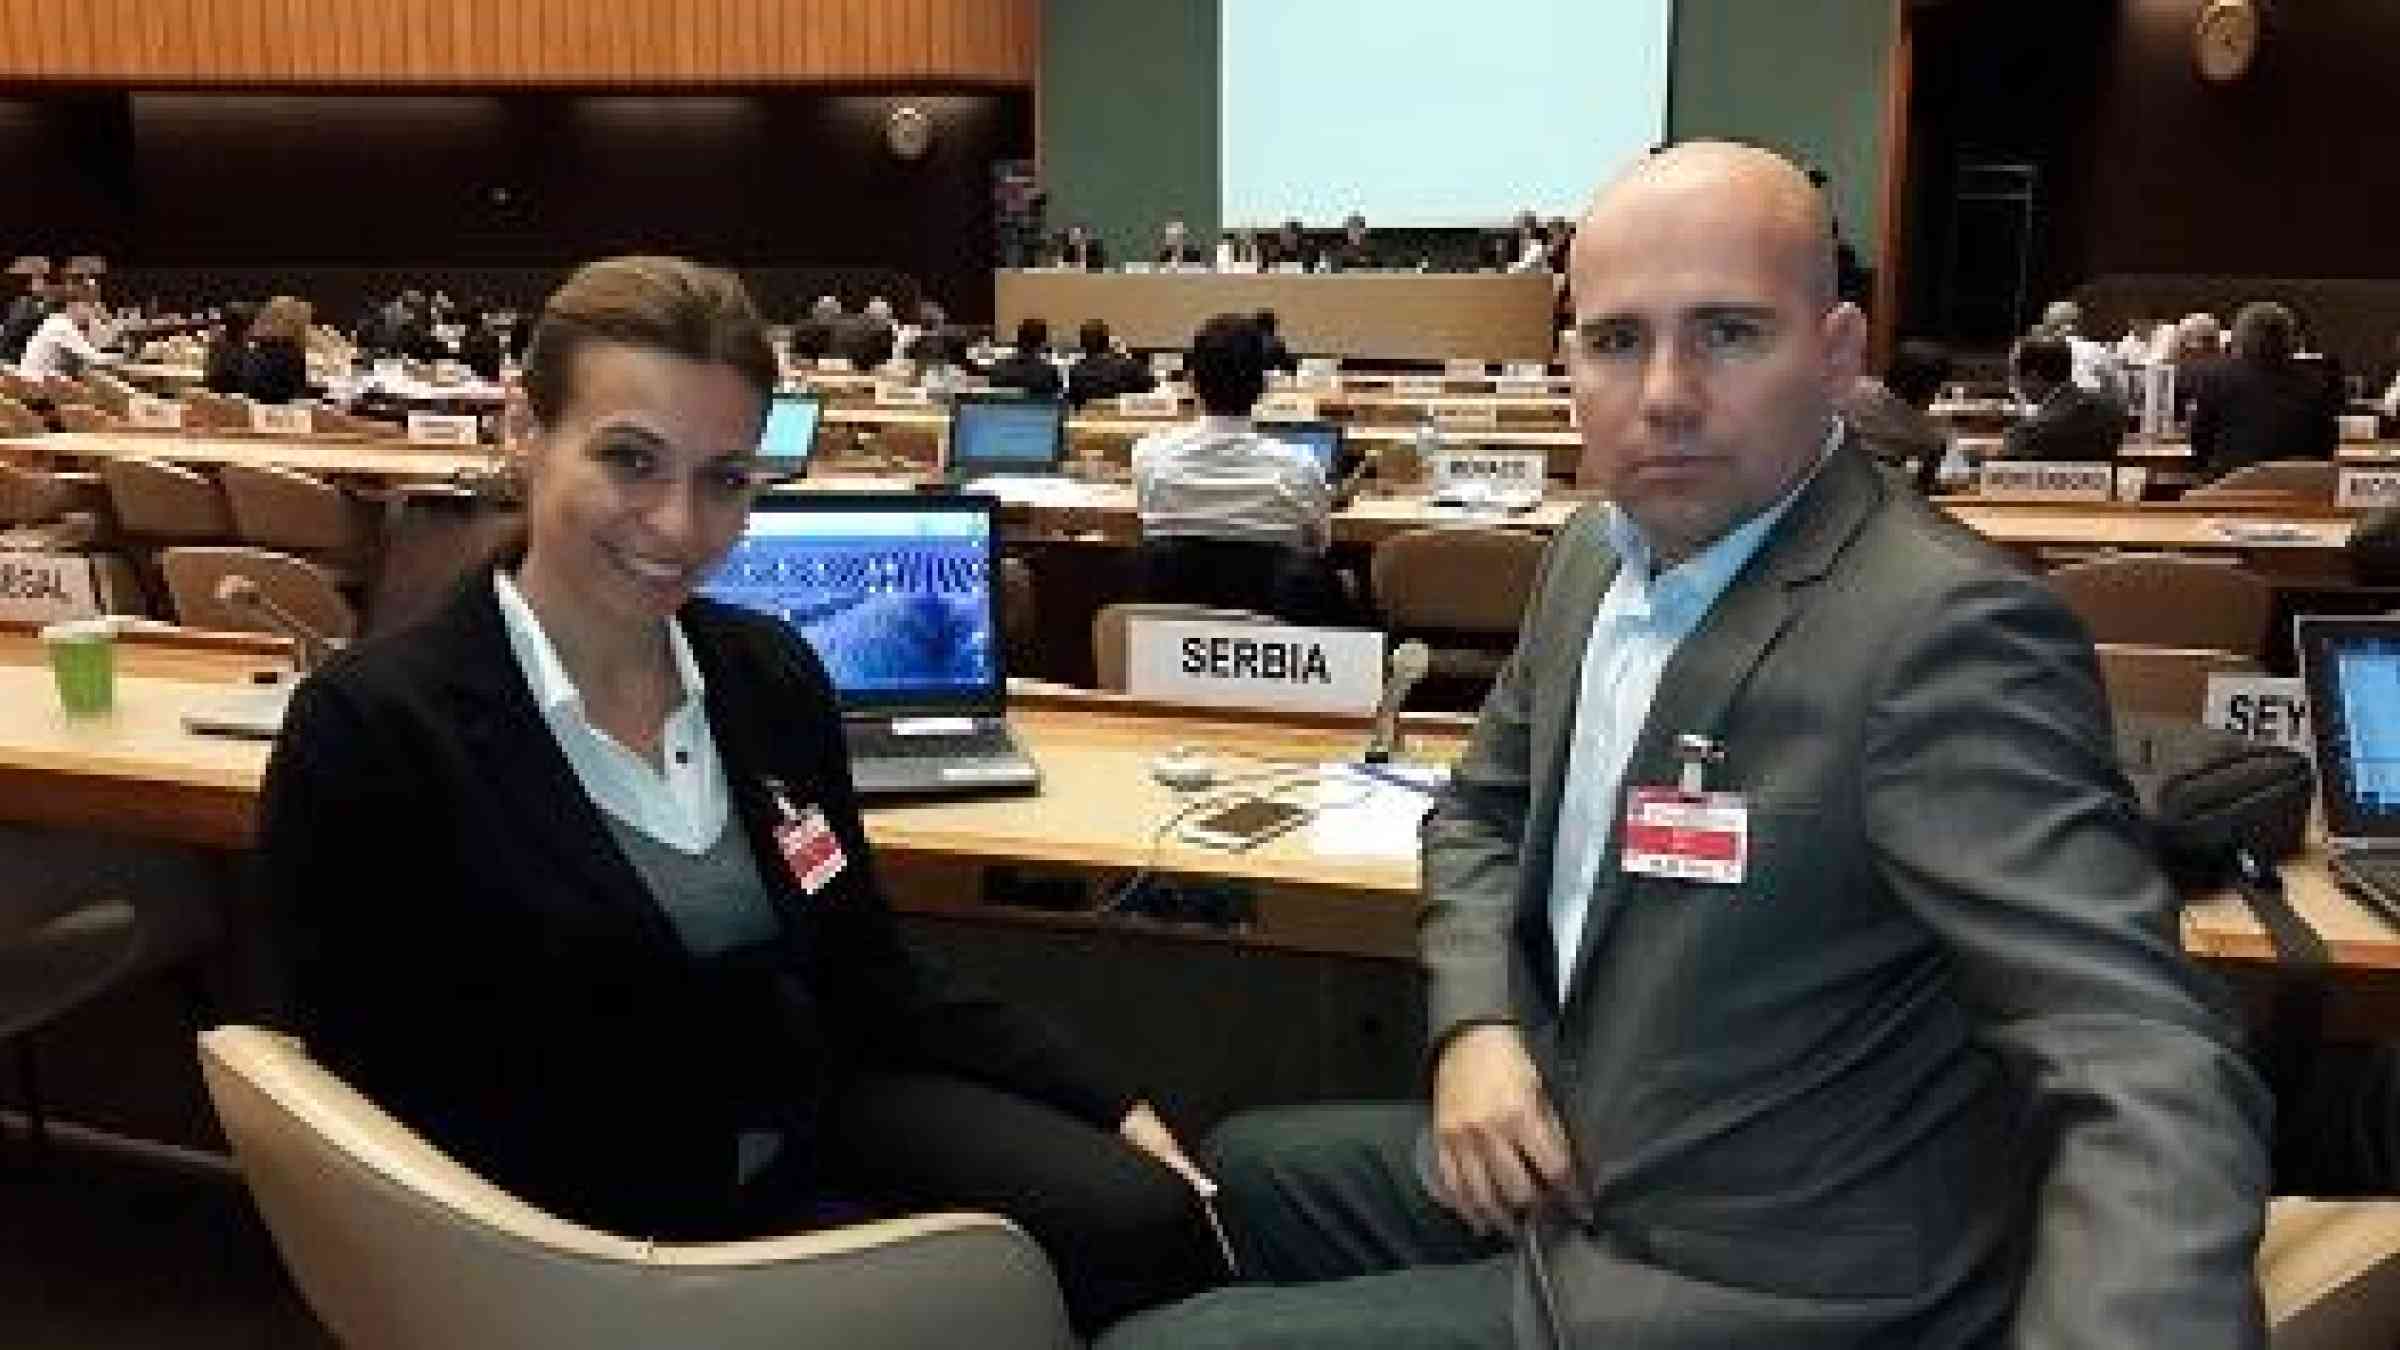 Sandra Nedeljkovic, Deputy Director of Serbia’s Government Office for Reconstruction and Flood Relief, and  Ivan Baras, Assistant Head of Sector for Emergency Management, at expert talks on Sendai Framework in Geneva (Photo: UNISDR)